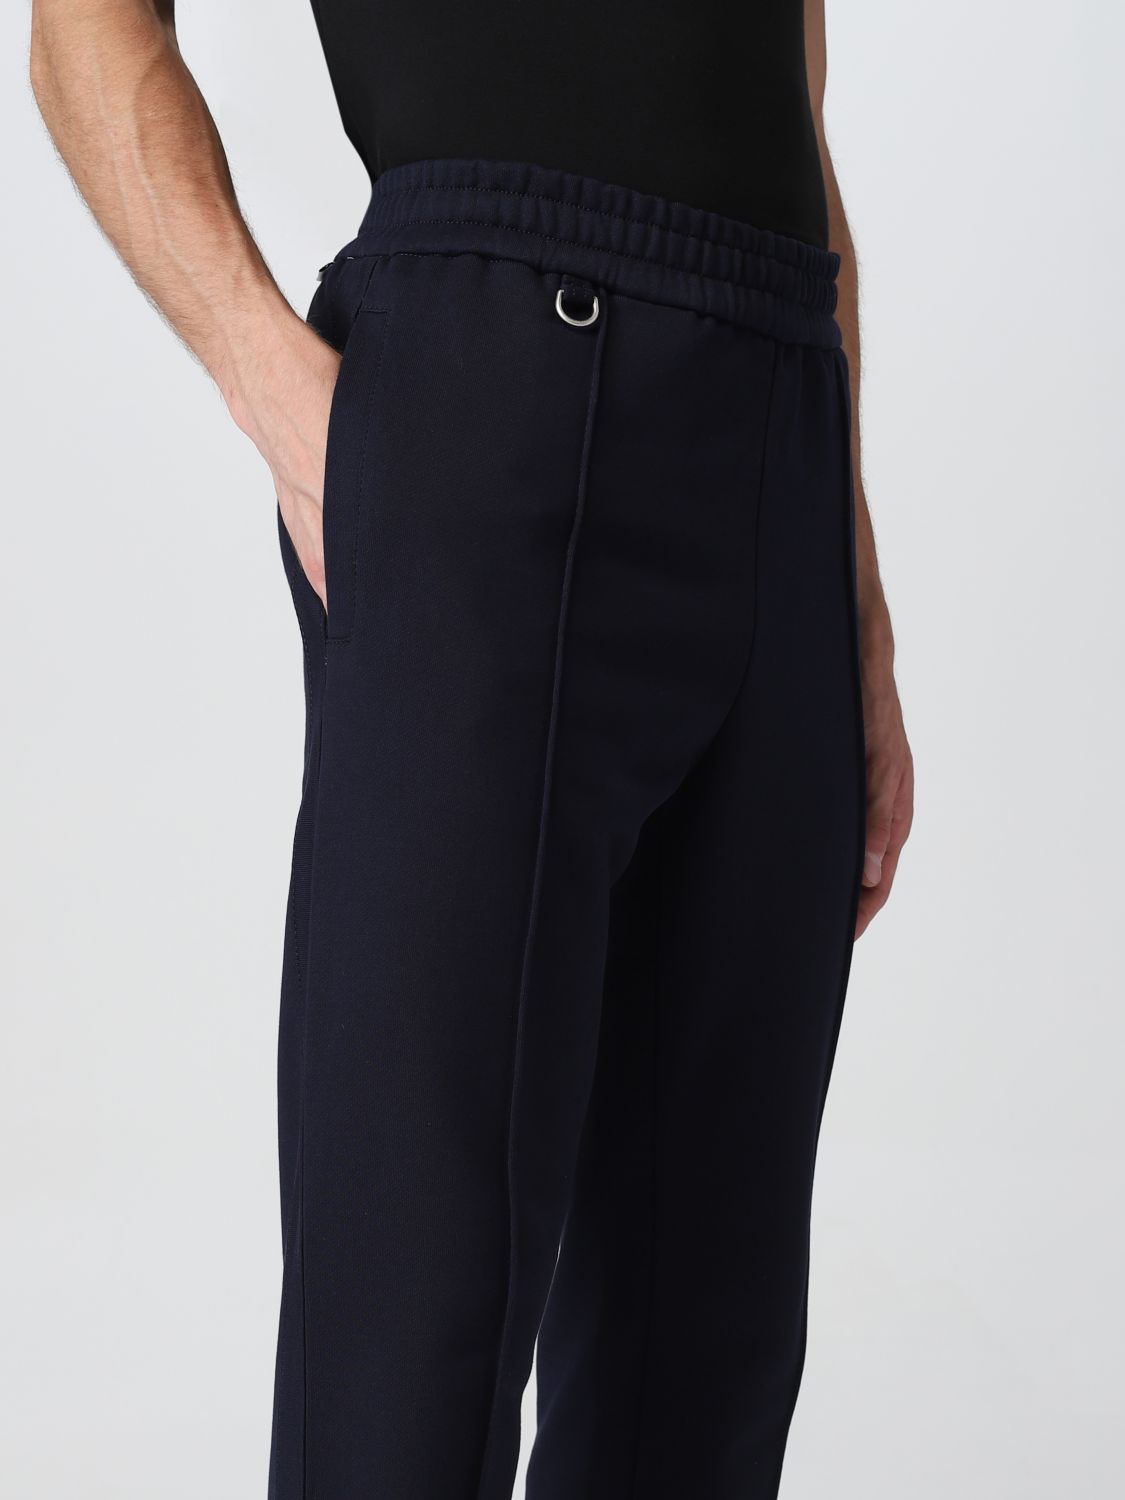 Trousers Paolo Pecora: Paolo Pecora trousers for men blue 3